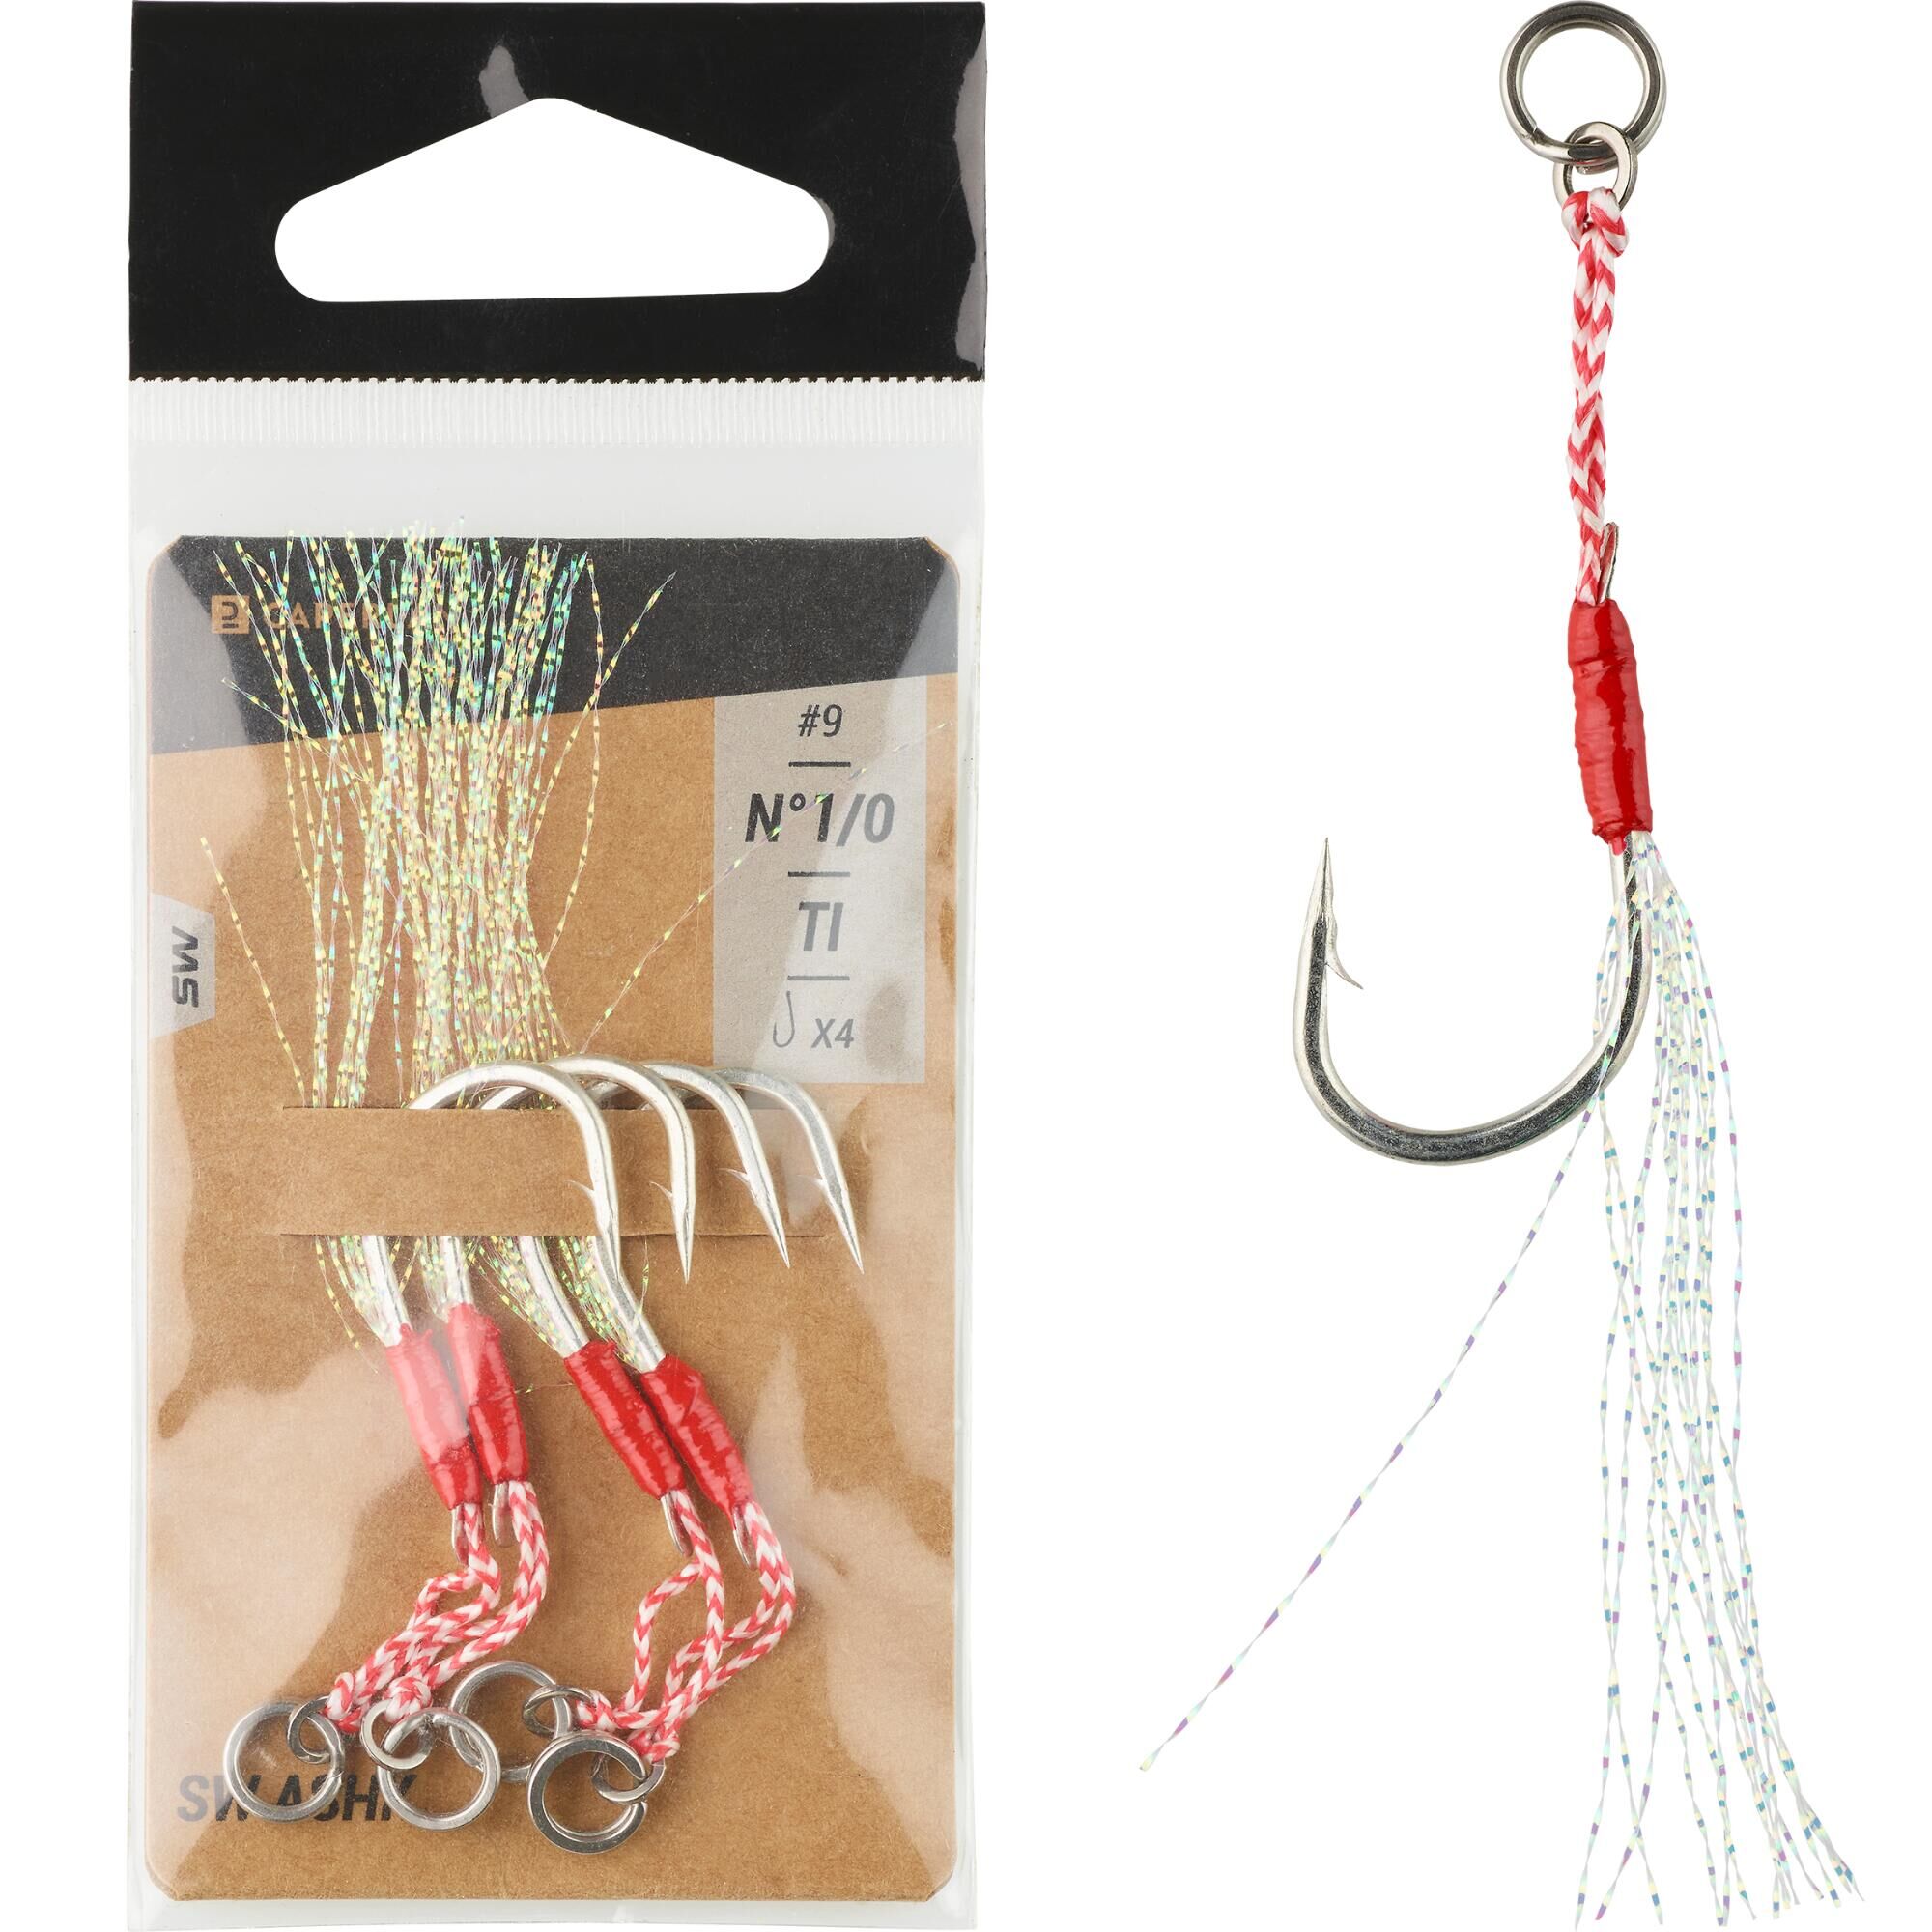 Sea fishing eyed hooks to line SN SPECIAL FOR RAZOR CLAMS - Decathlon